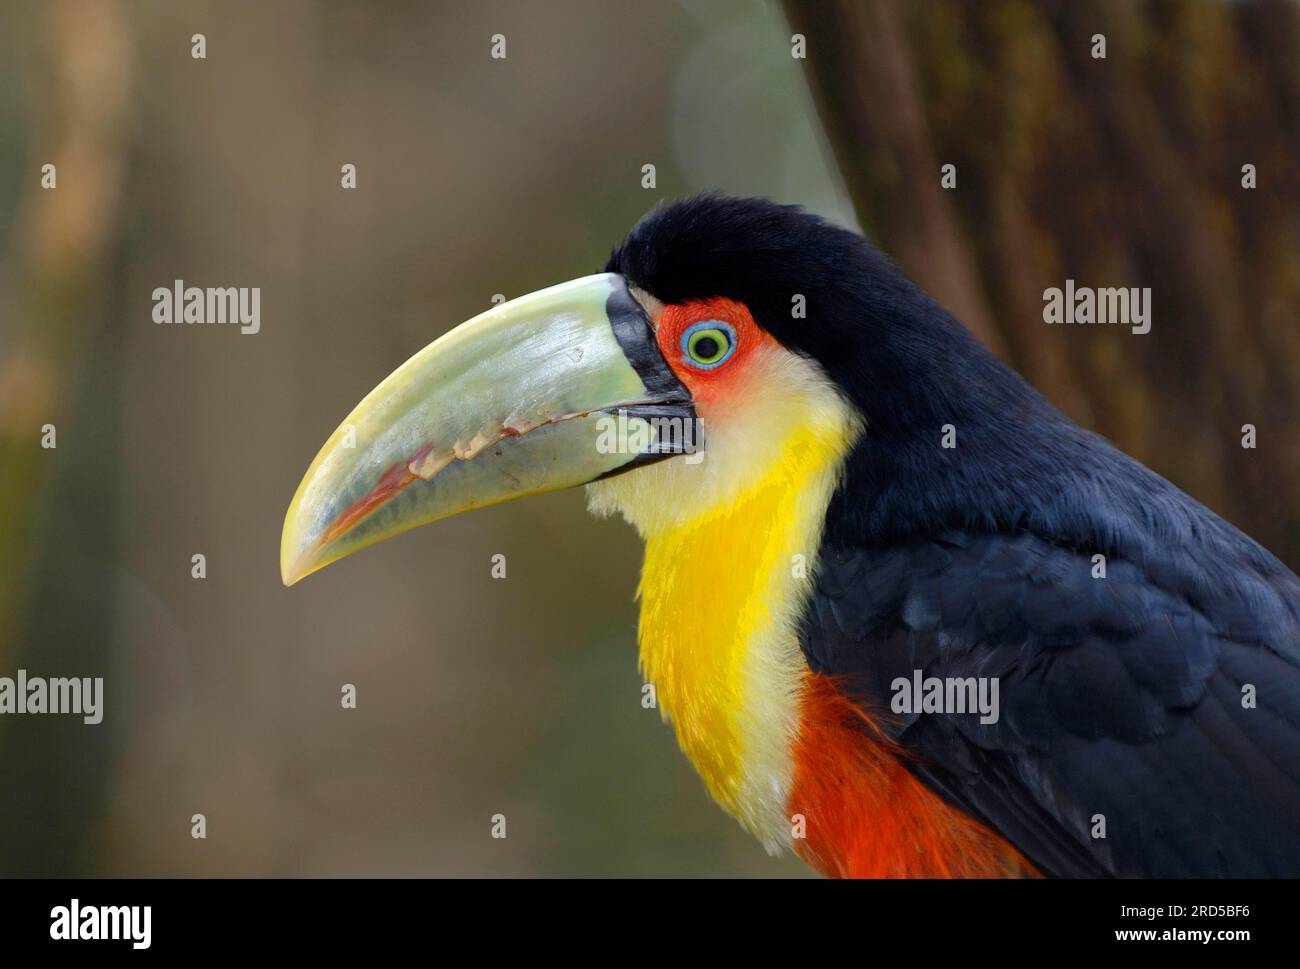 Green-billed toucan (Ramphastos dicolorus), Page, Brazil Stock Photo